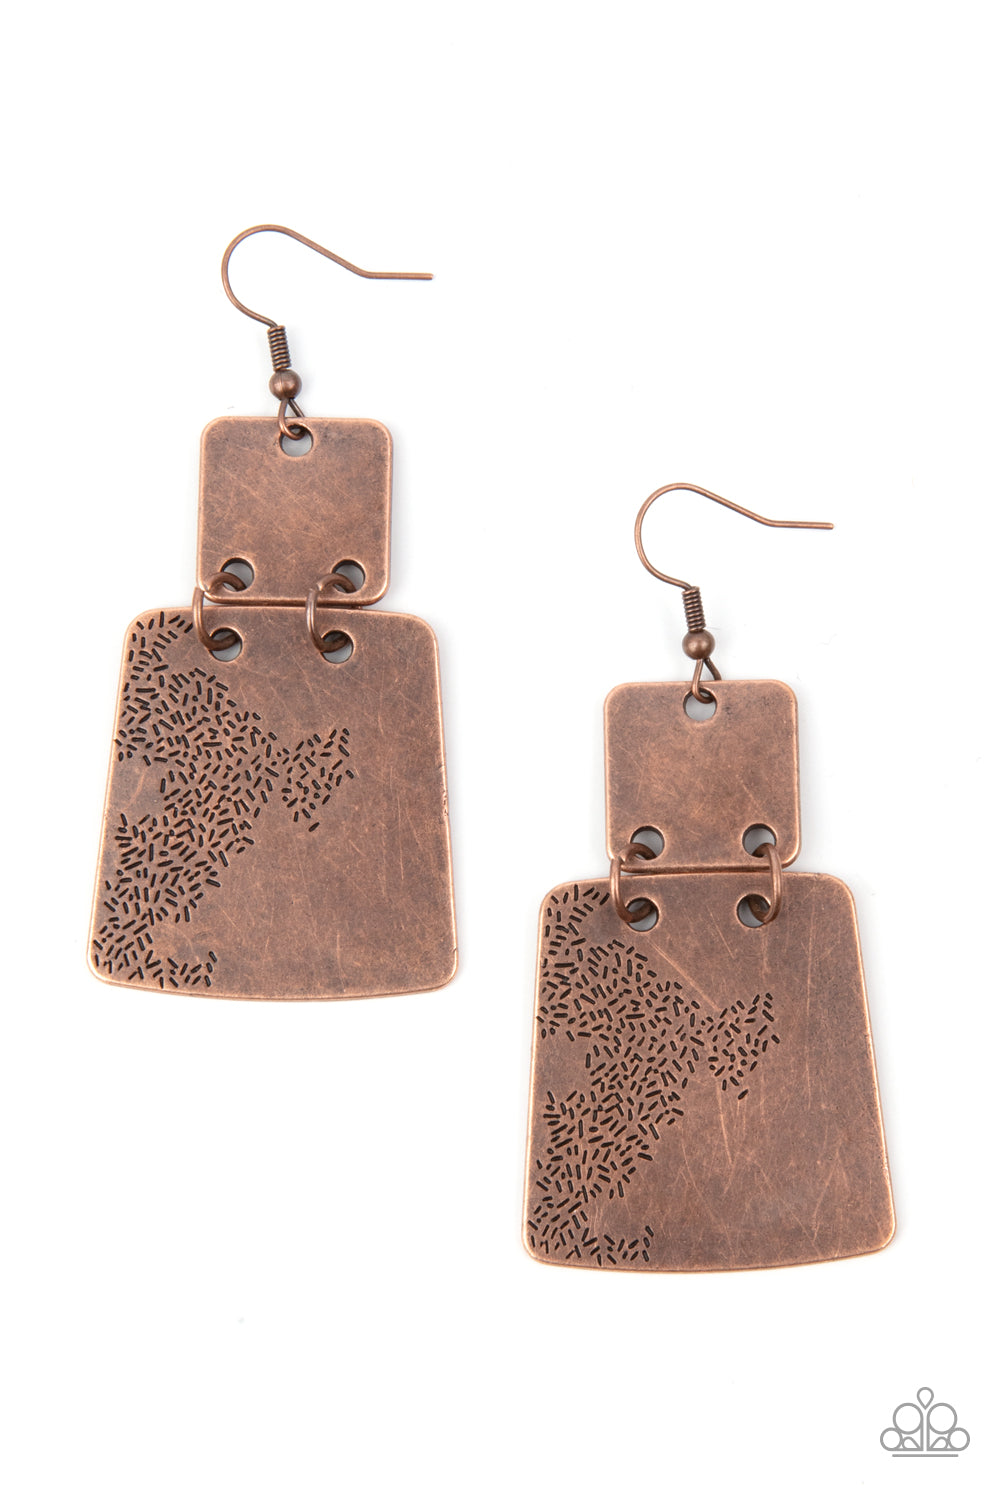 Stamped in an abstract pattern, a flared copper plate links to the bottom of a square copper frame, creating a rustic lure. Earring attaches to a standard fishhook fitting.